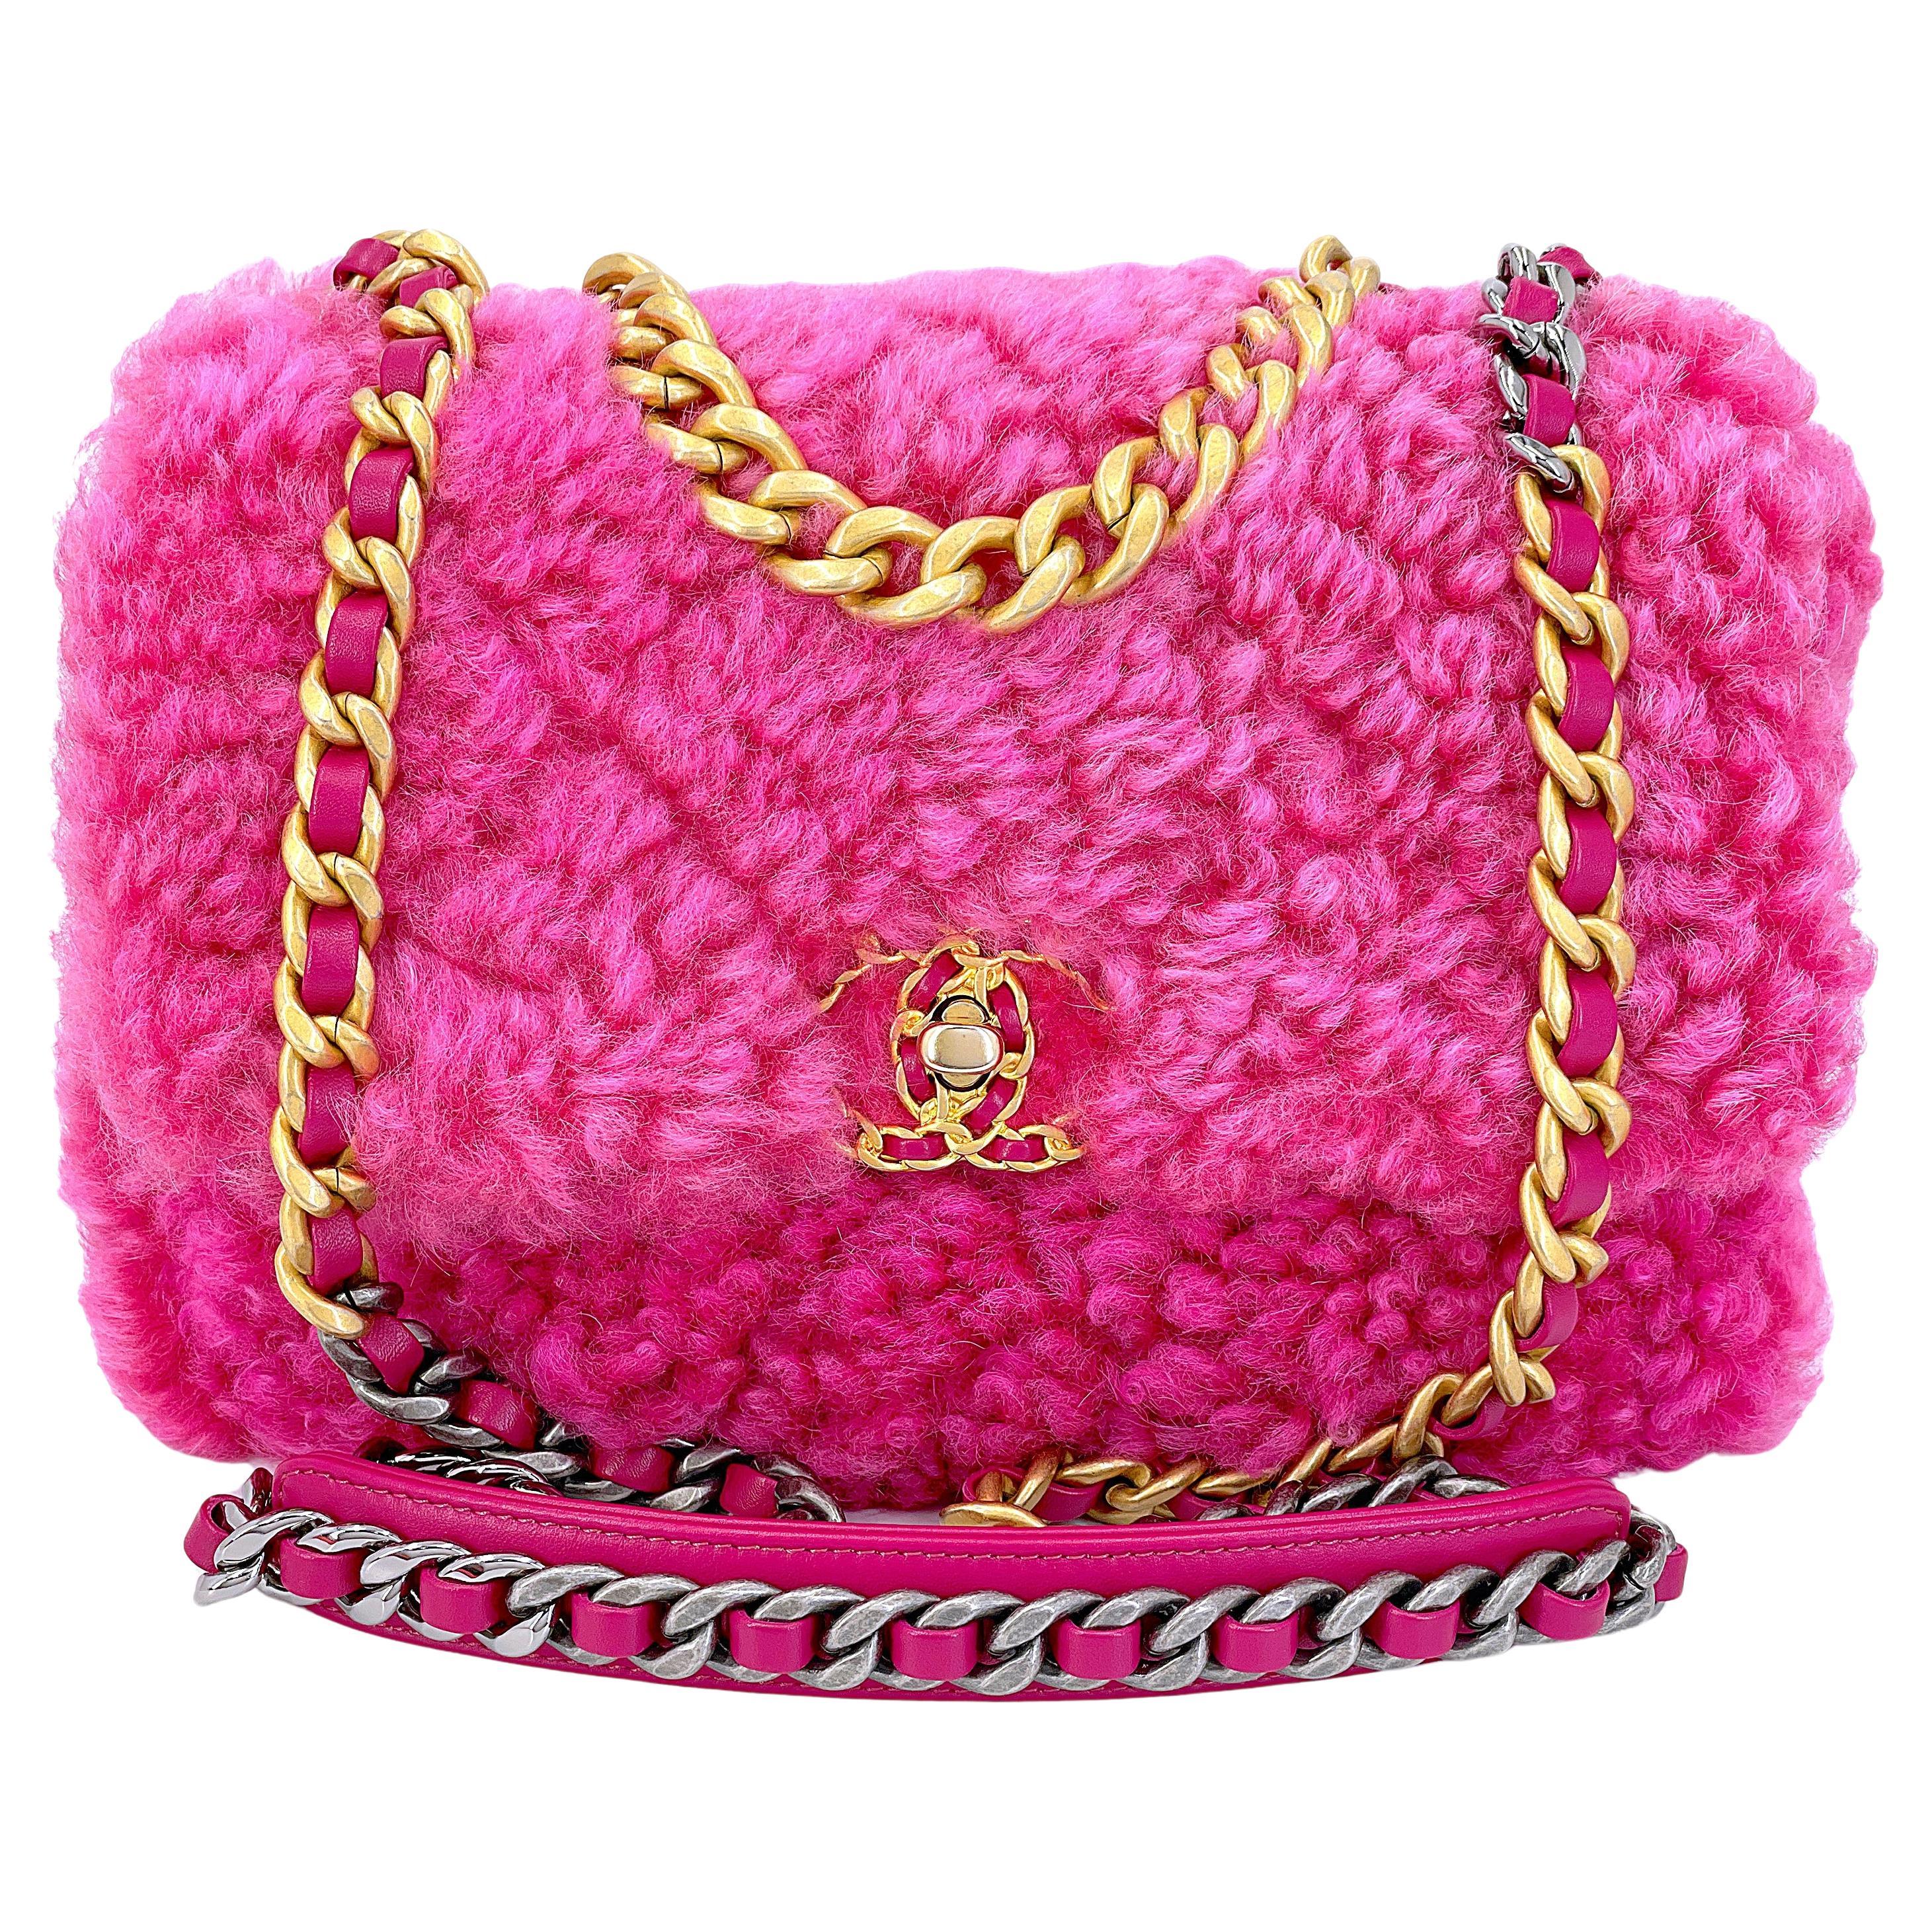 Chanel 19 Pink Shearling Fur Small Medium Flap Bag 67786 For Sale